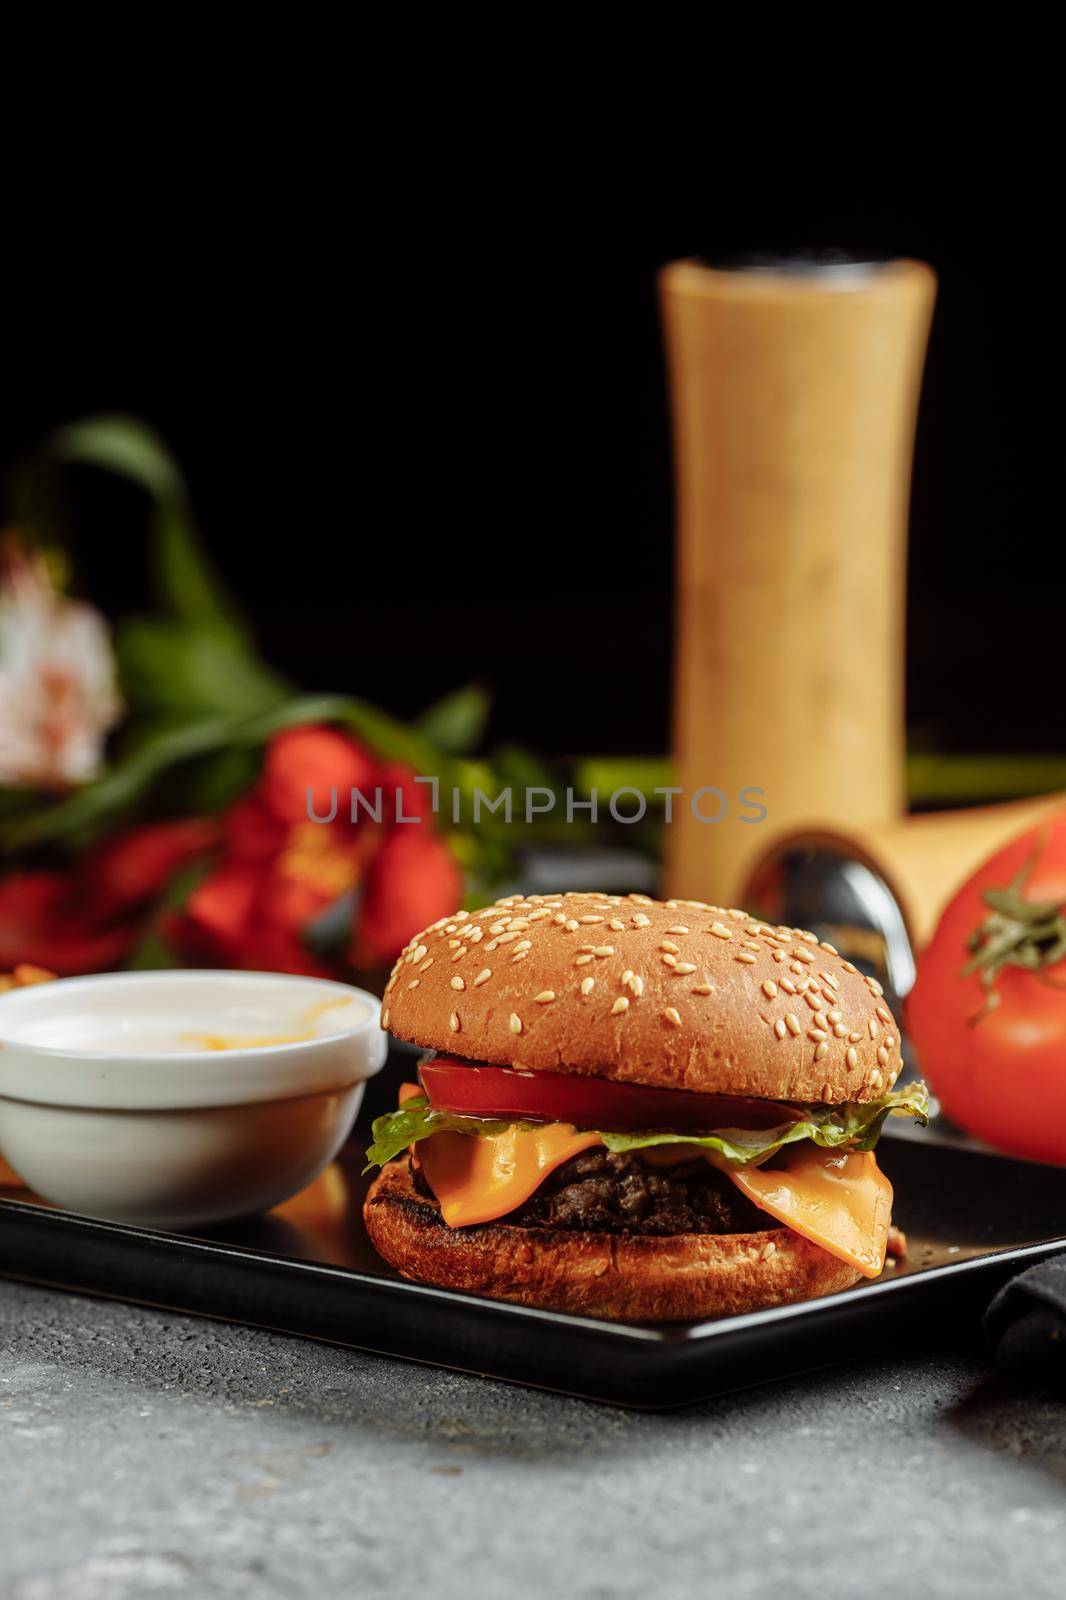 Concept: restaurant menus, healthy eating, homemade, gourmands, gluttony. Trendy burger with chicken in black bun with ingredients and french fries on messy vintage wooden background.